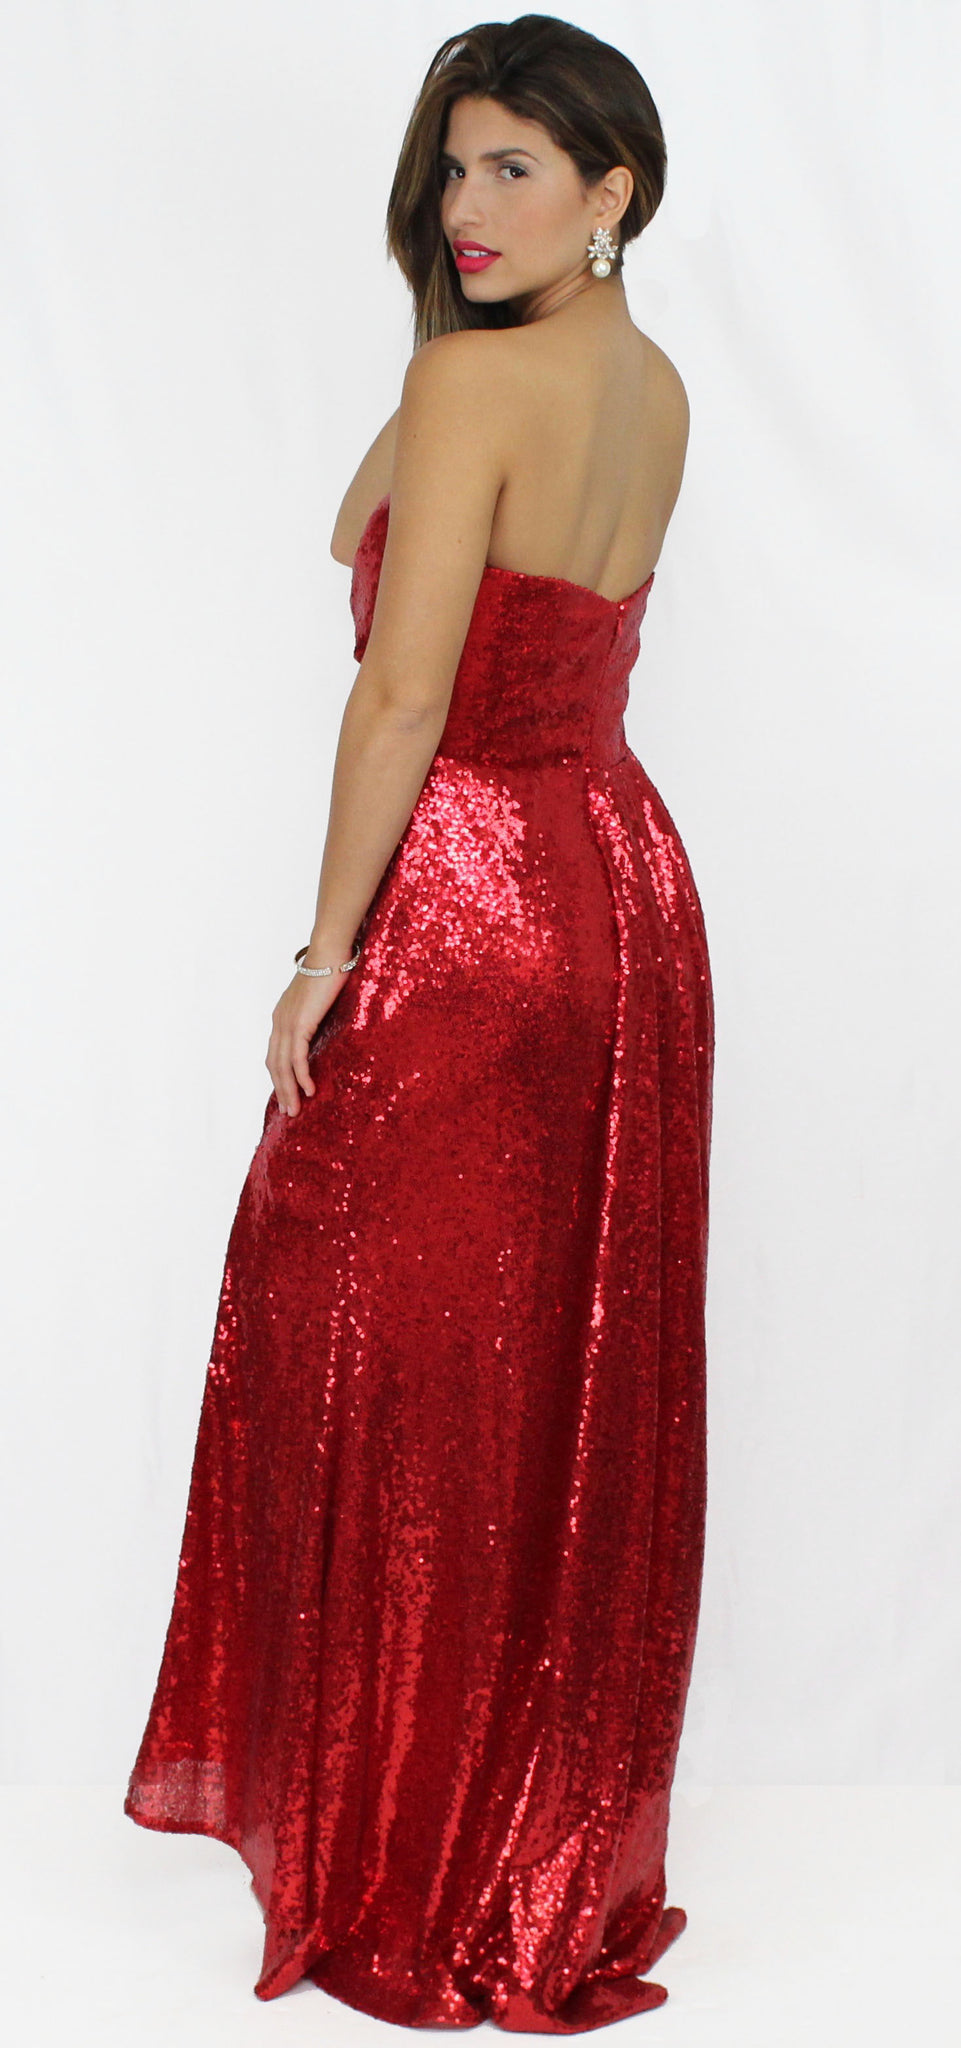 Ready for Red Carpet in Red Sequins Gown